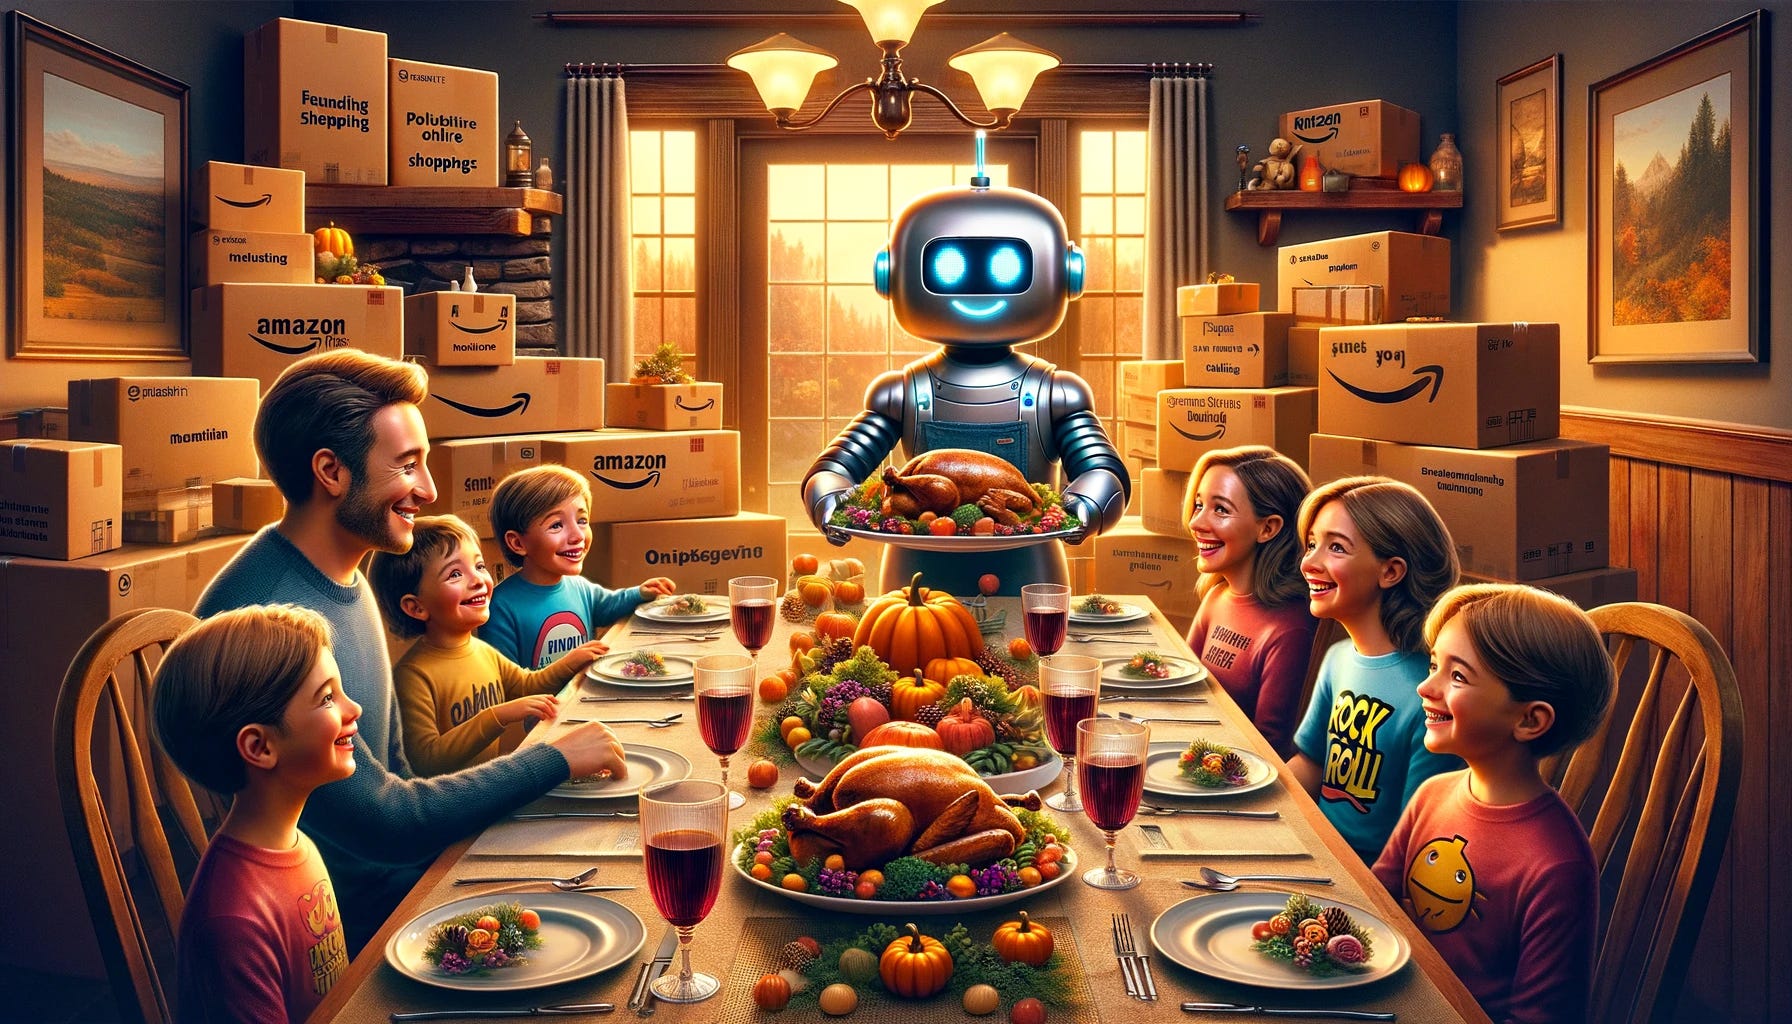 A merged Thanksgiving scene combining elements from the original and the latest images. The scene features the family gathered around the Thanksgiving table, with children in rock 'n' roll T-shirts, and a focus on the bountiful table setting. The friendly robots from the latest image, designed with smiling faces and a more approachable look, are assisting in serving the meal. The background includes the big stack of packages from the original scene, symbolizing online shopping, and the room is warmly lit with rich colors and detailed expressions, maintaining the sense of familial warmth and unity.